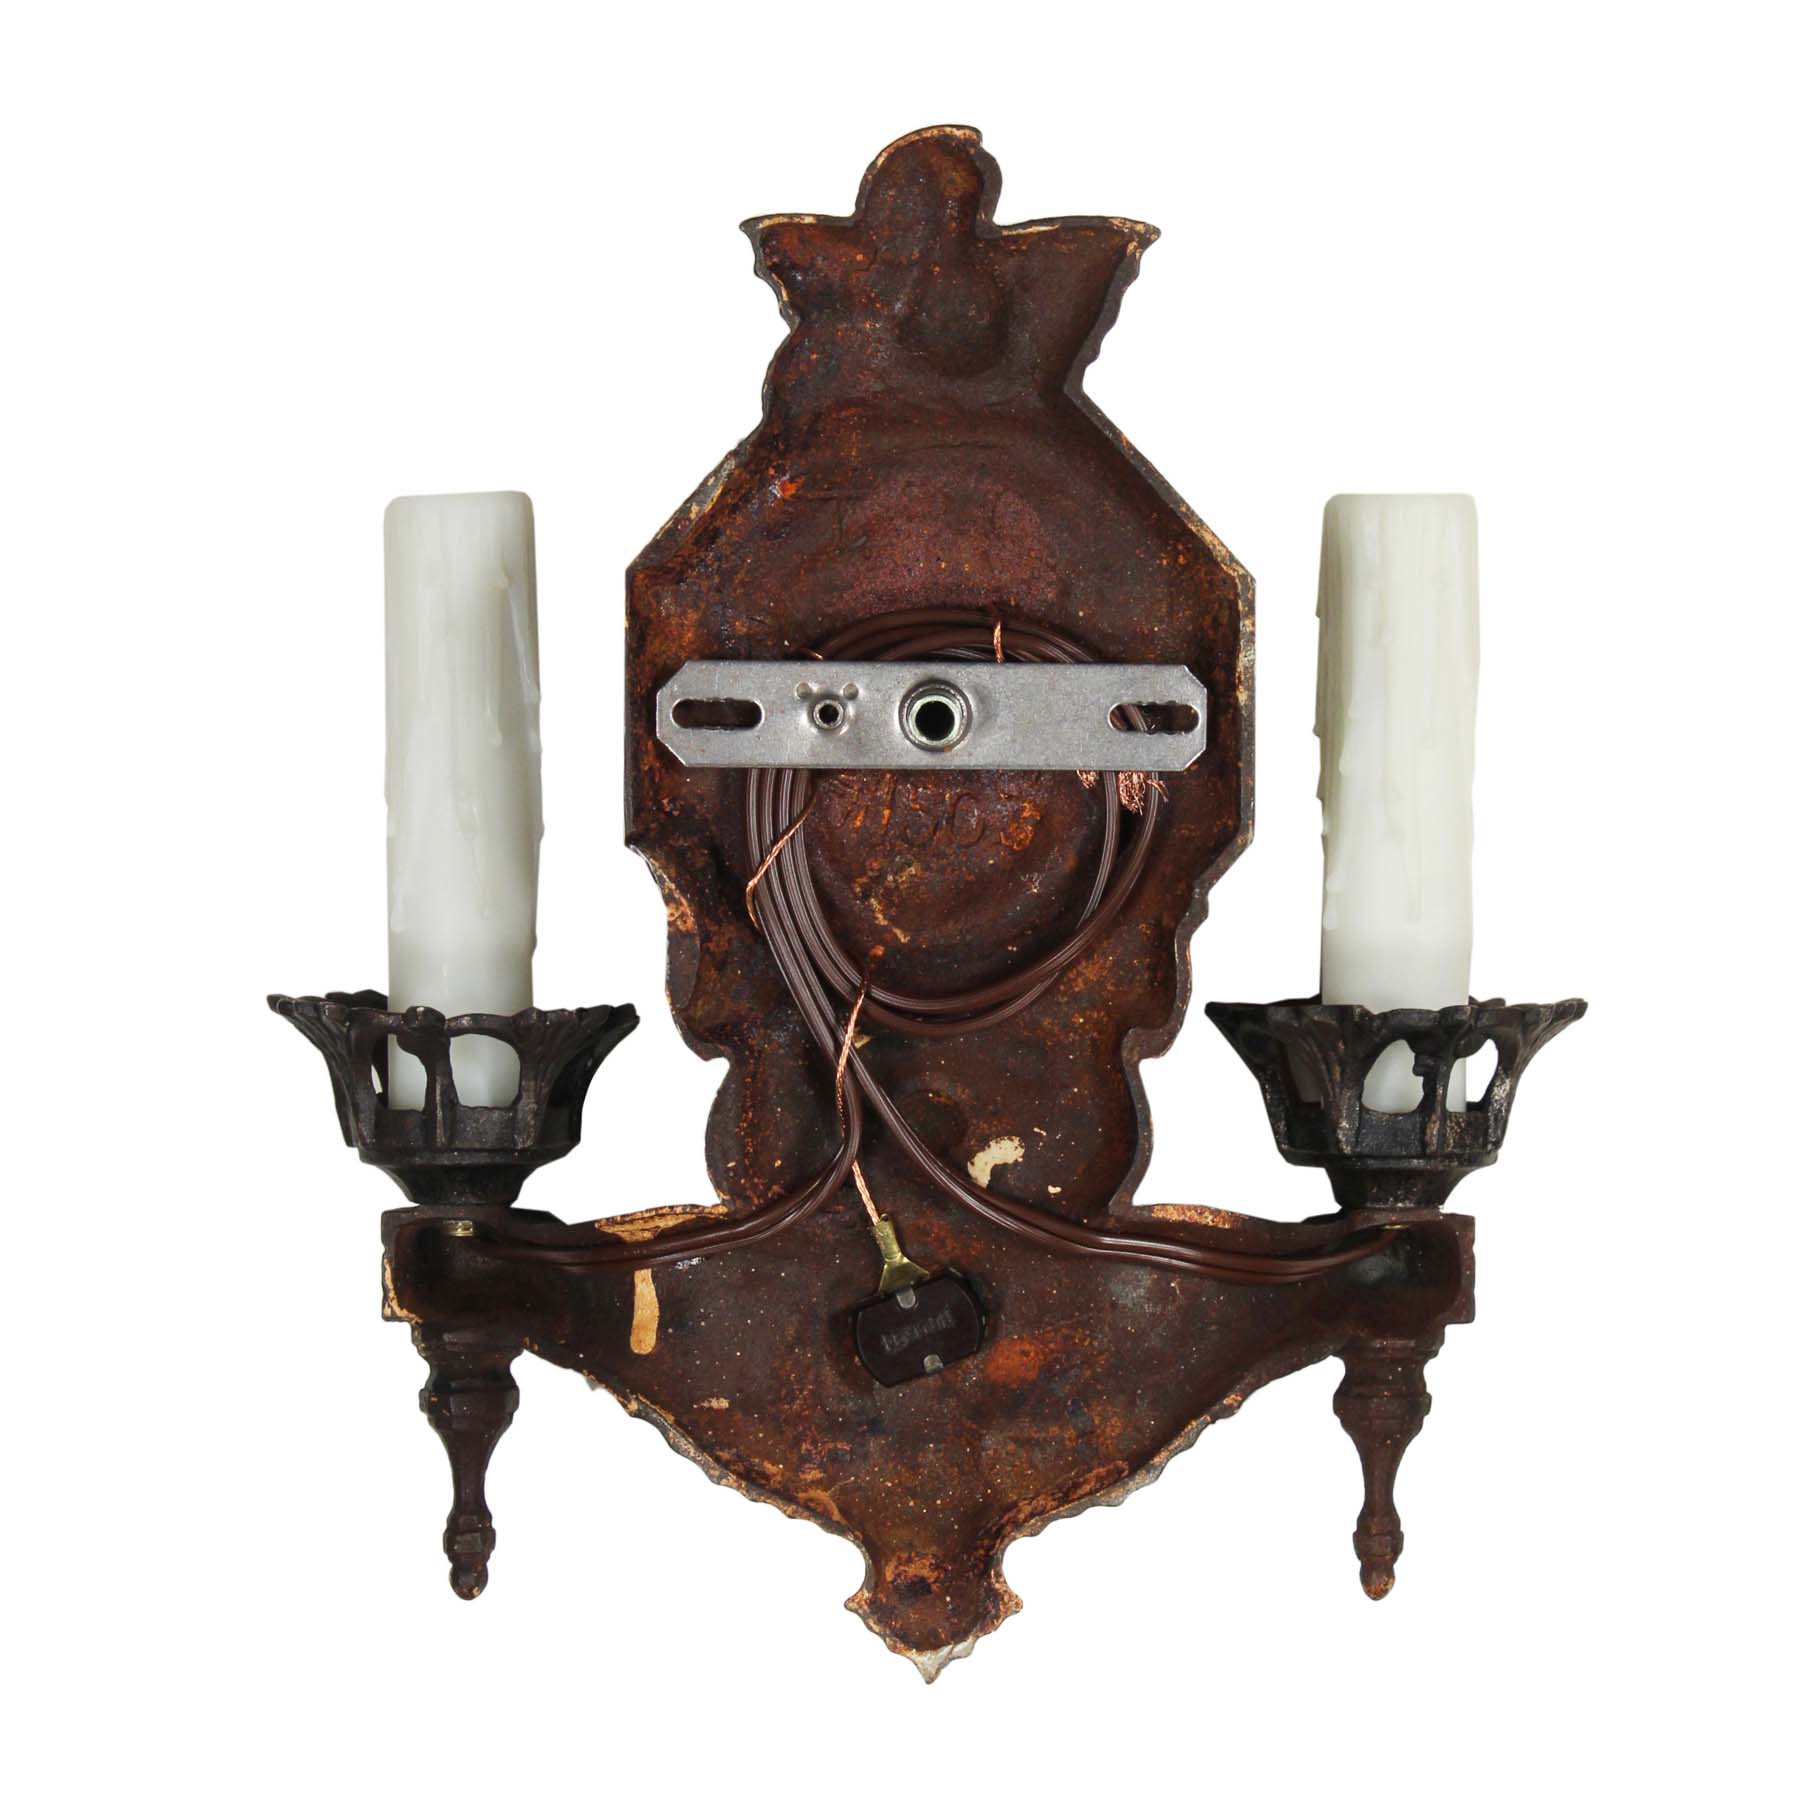 Matching Pairs of Antique Figural Double-Arm Sconces with Birds-69201